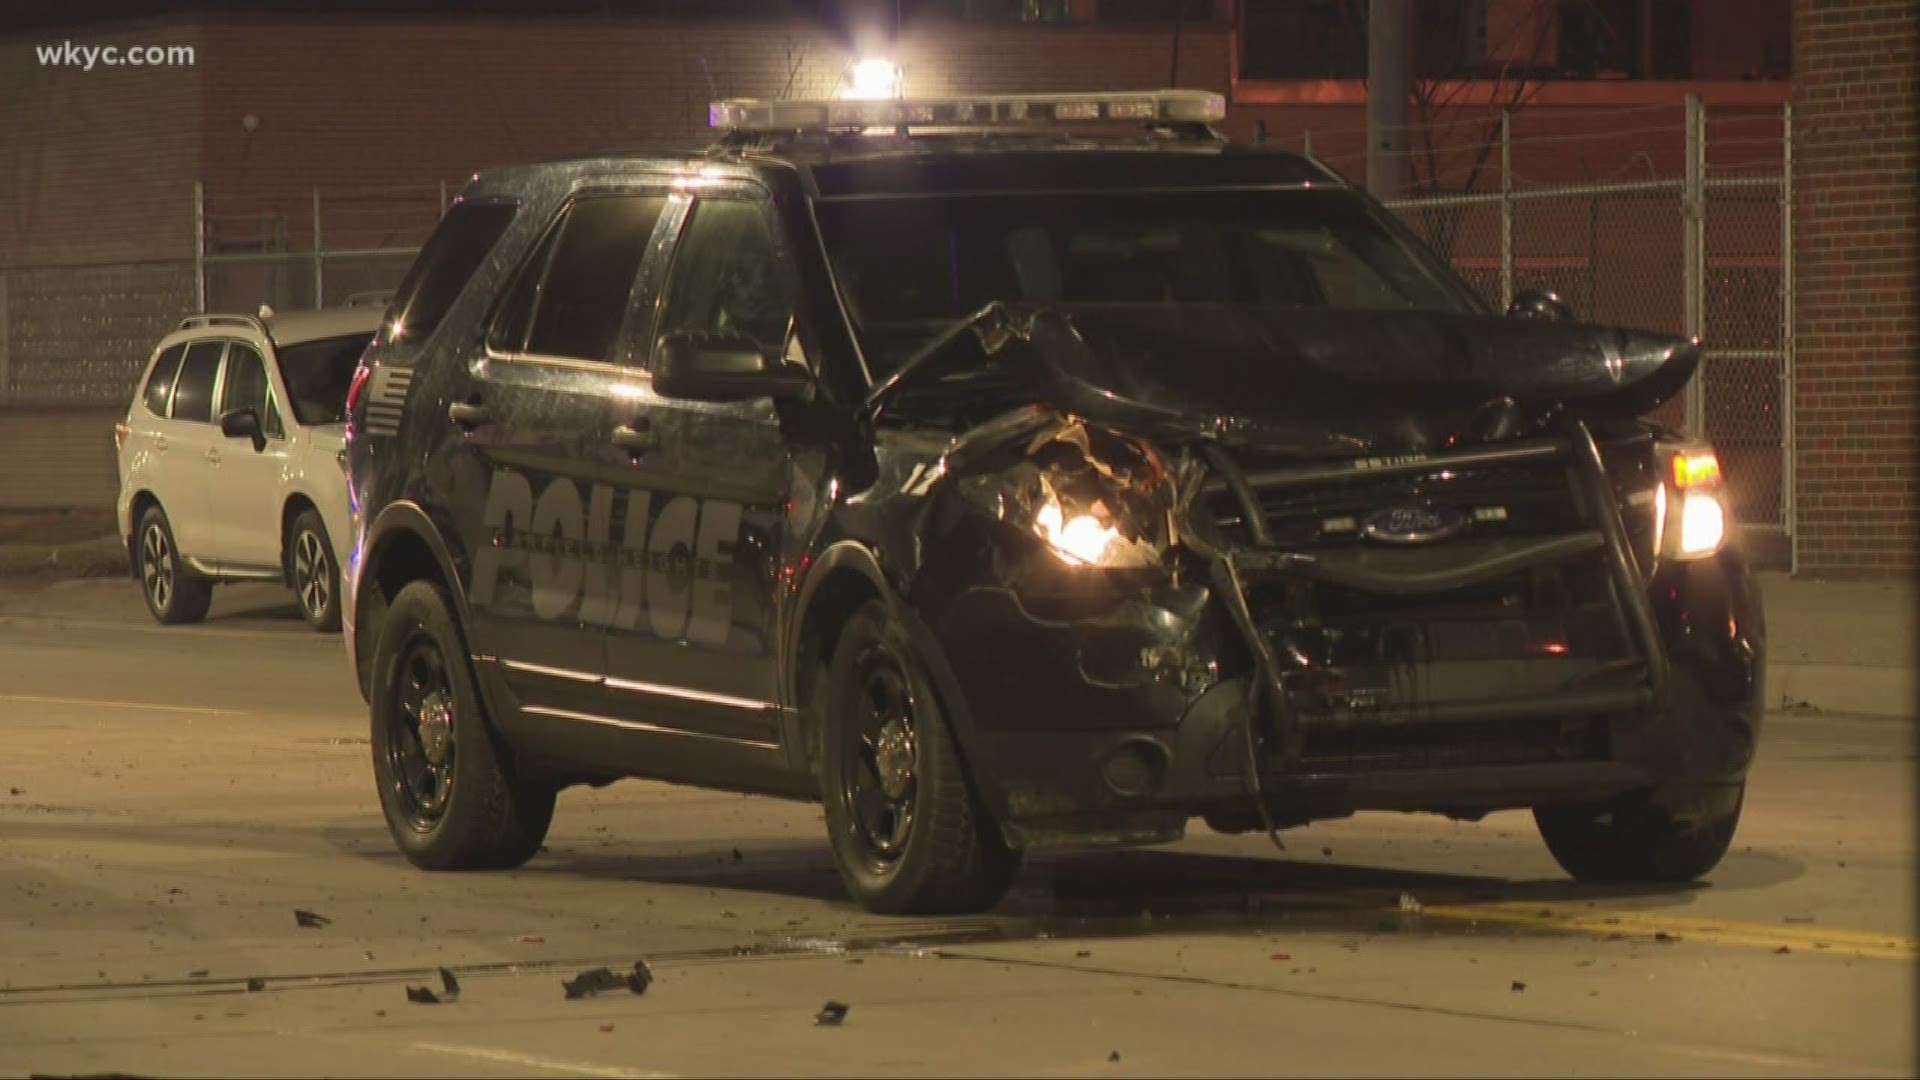 March 6, 2020: Two police vehicles were involved in a crash following an early morning chase Friday.
It happened around 2:30 a.m. as officers were pursuing a car.